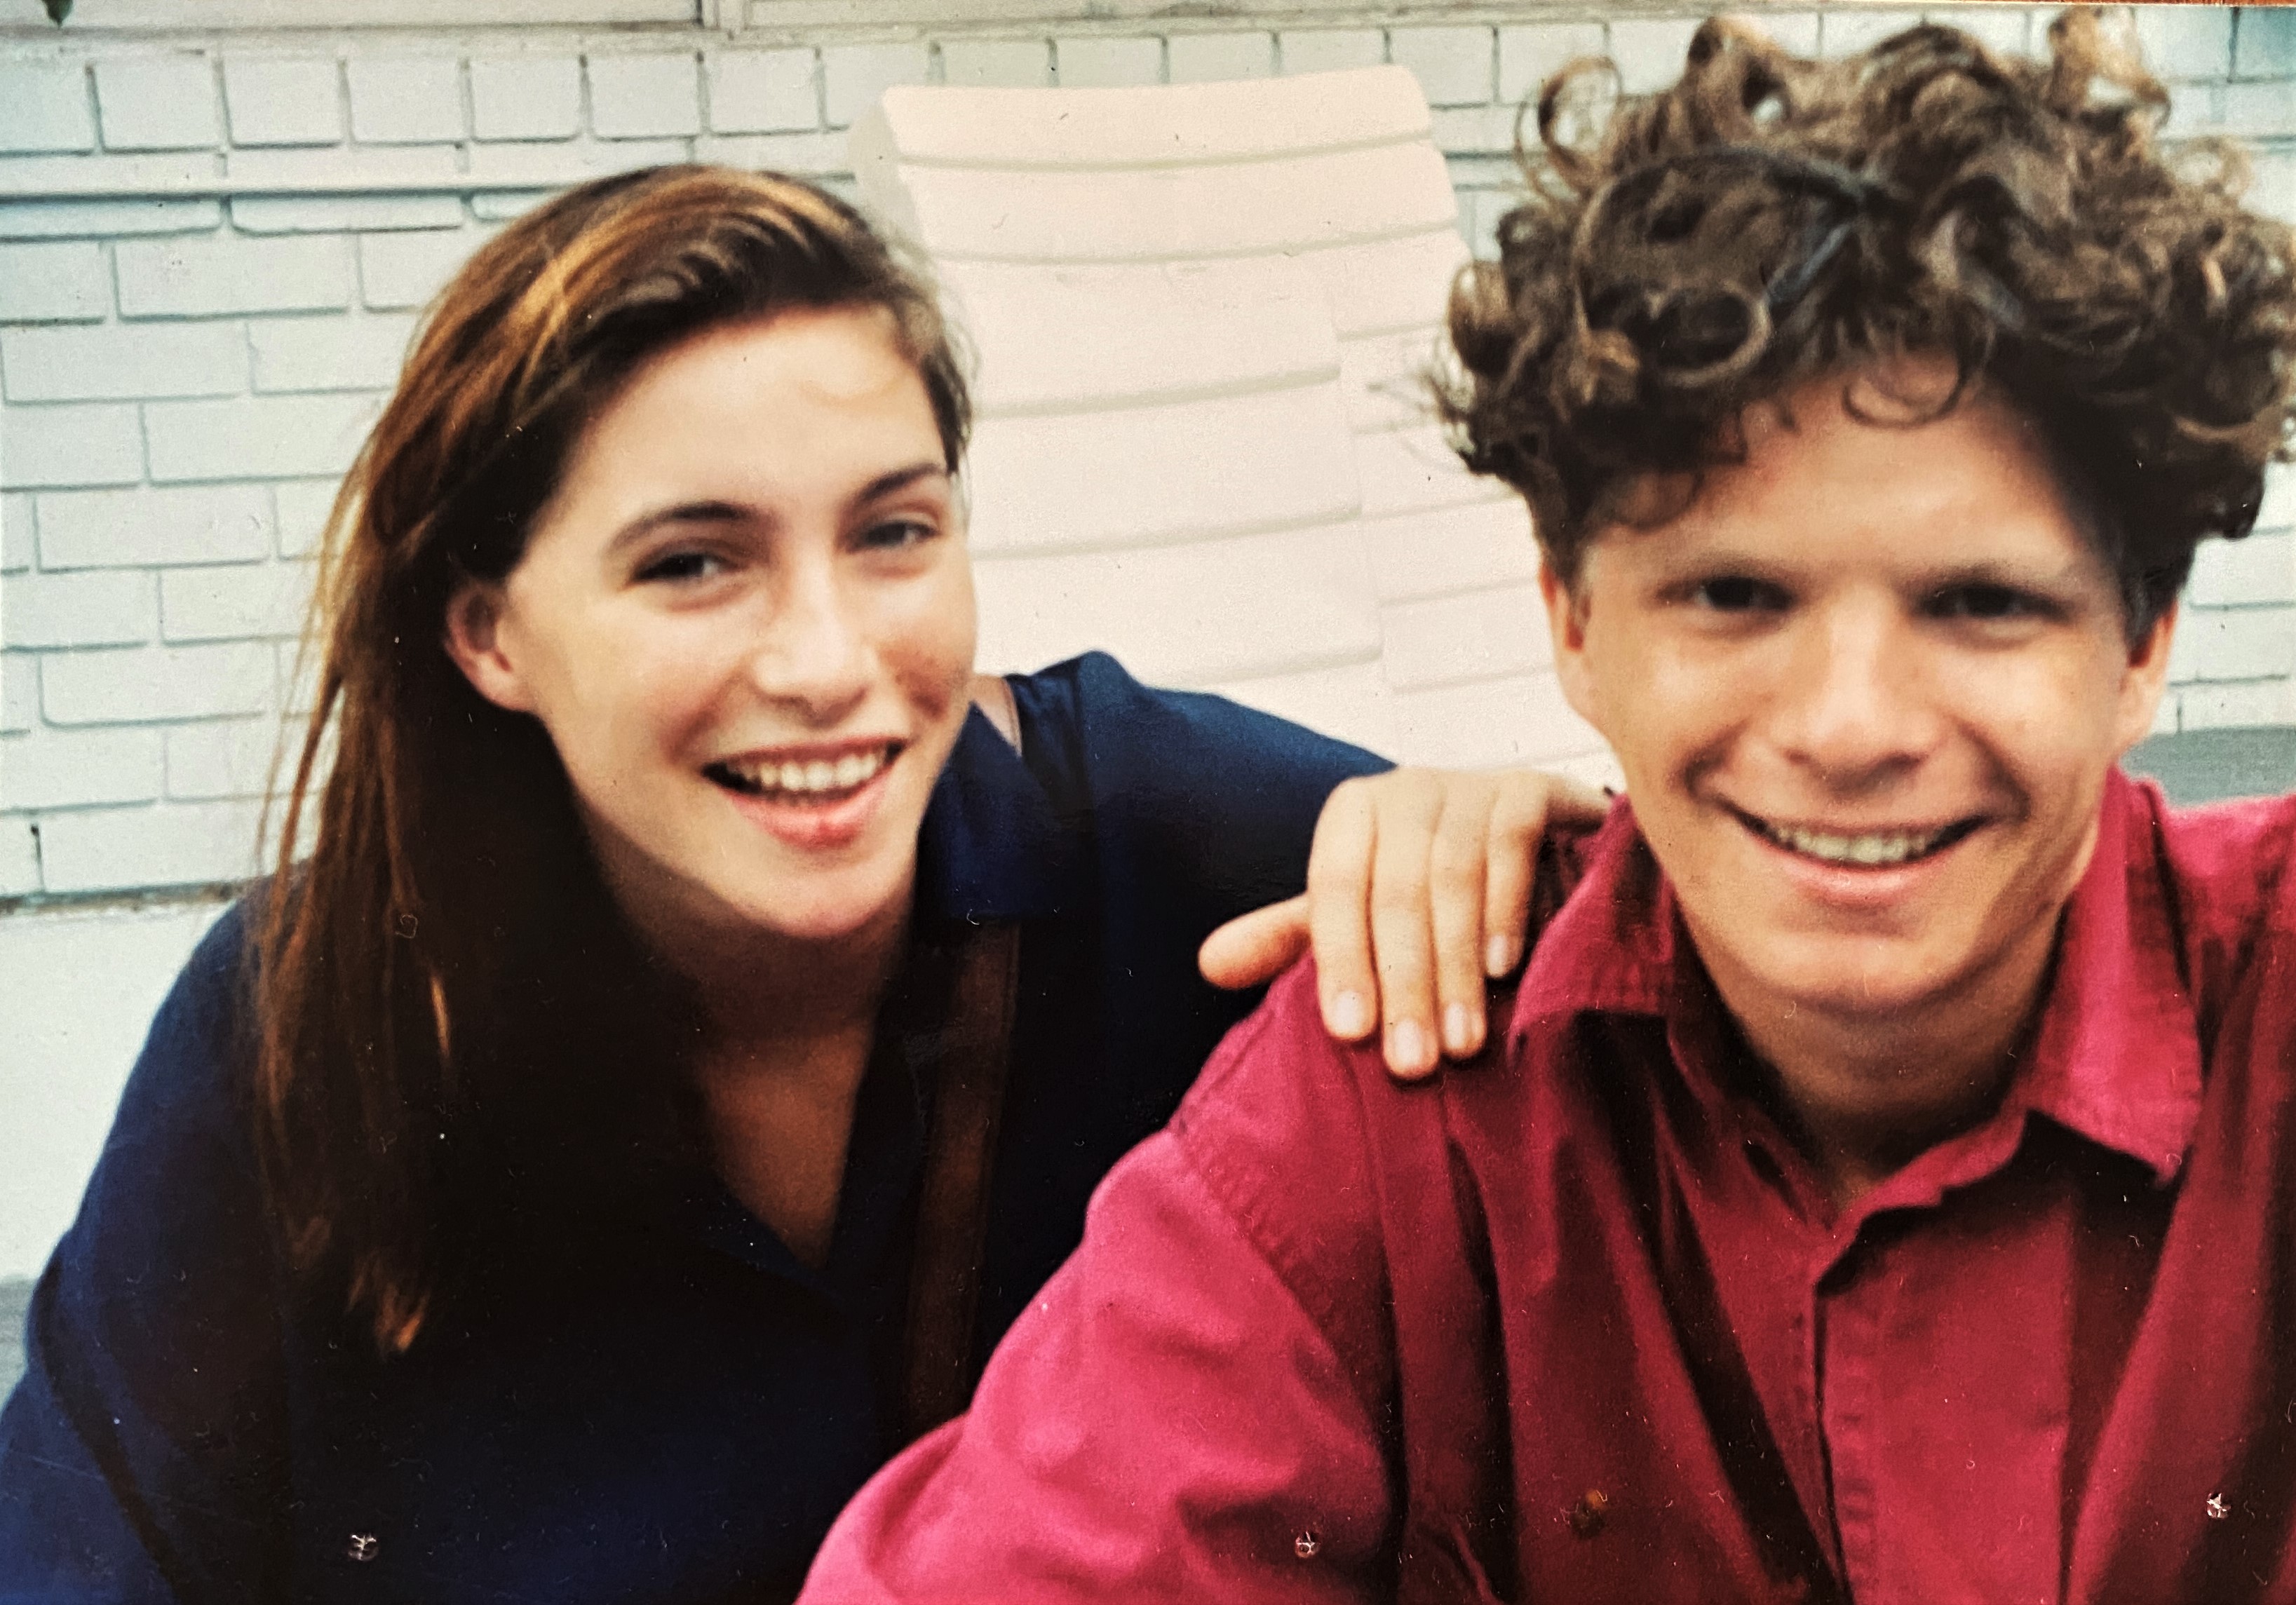 Claudia and Rupert in their 20s. She has her hand on his shoulder, and both are smiling at the camera.